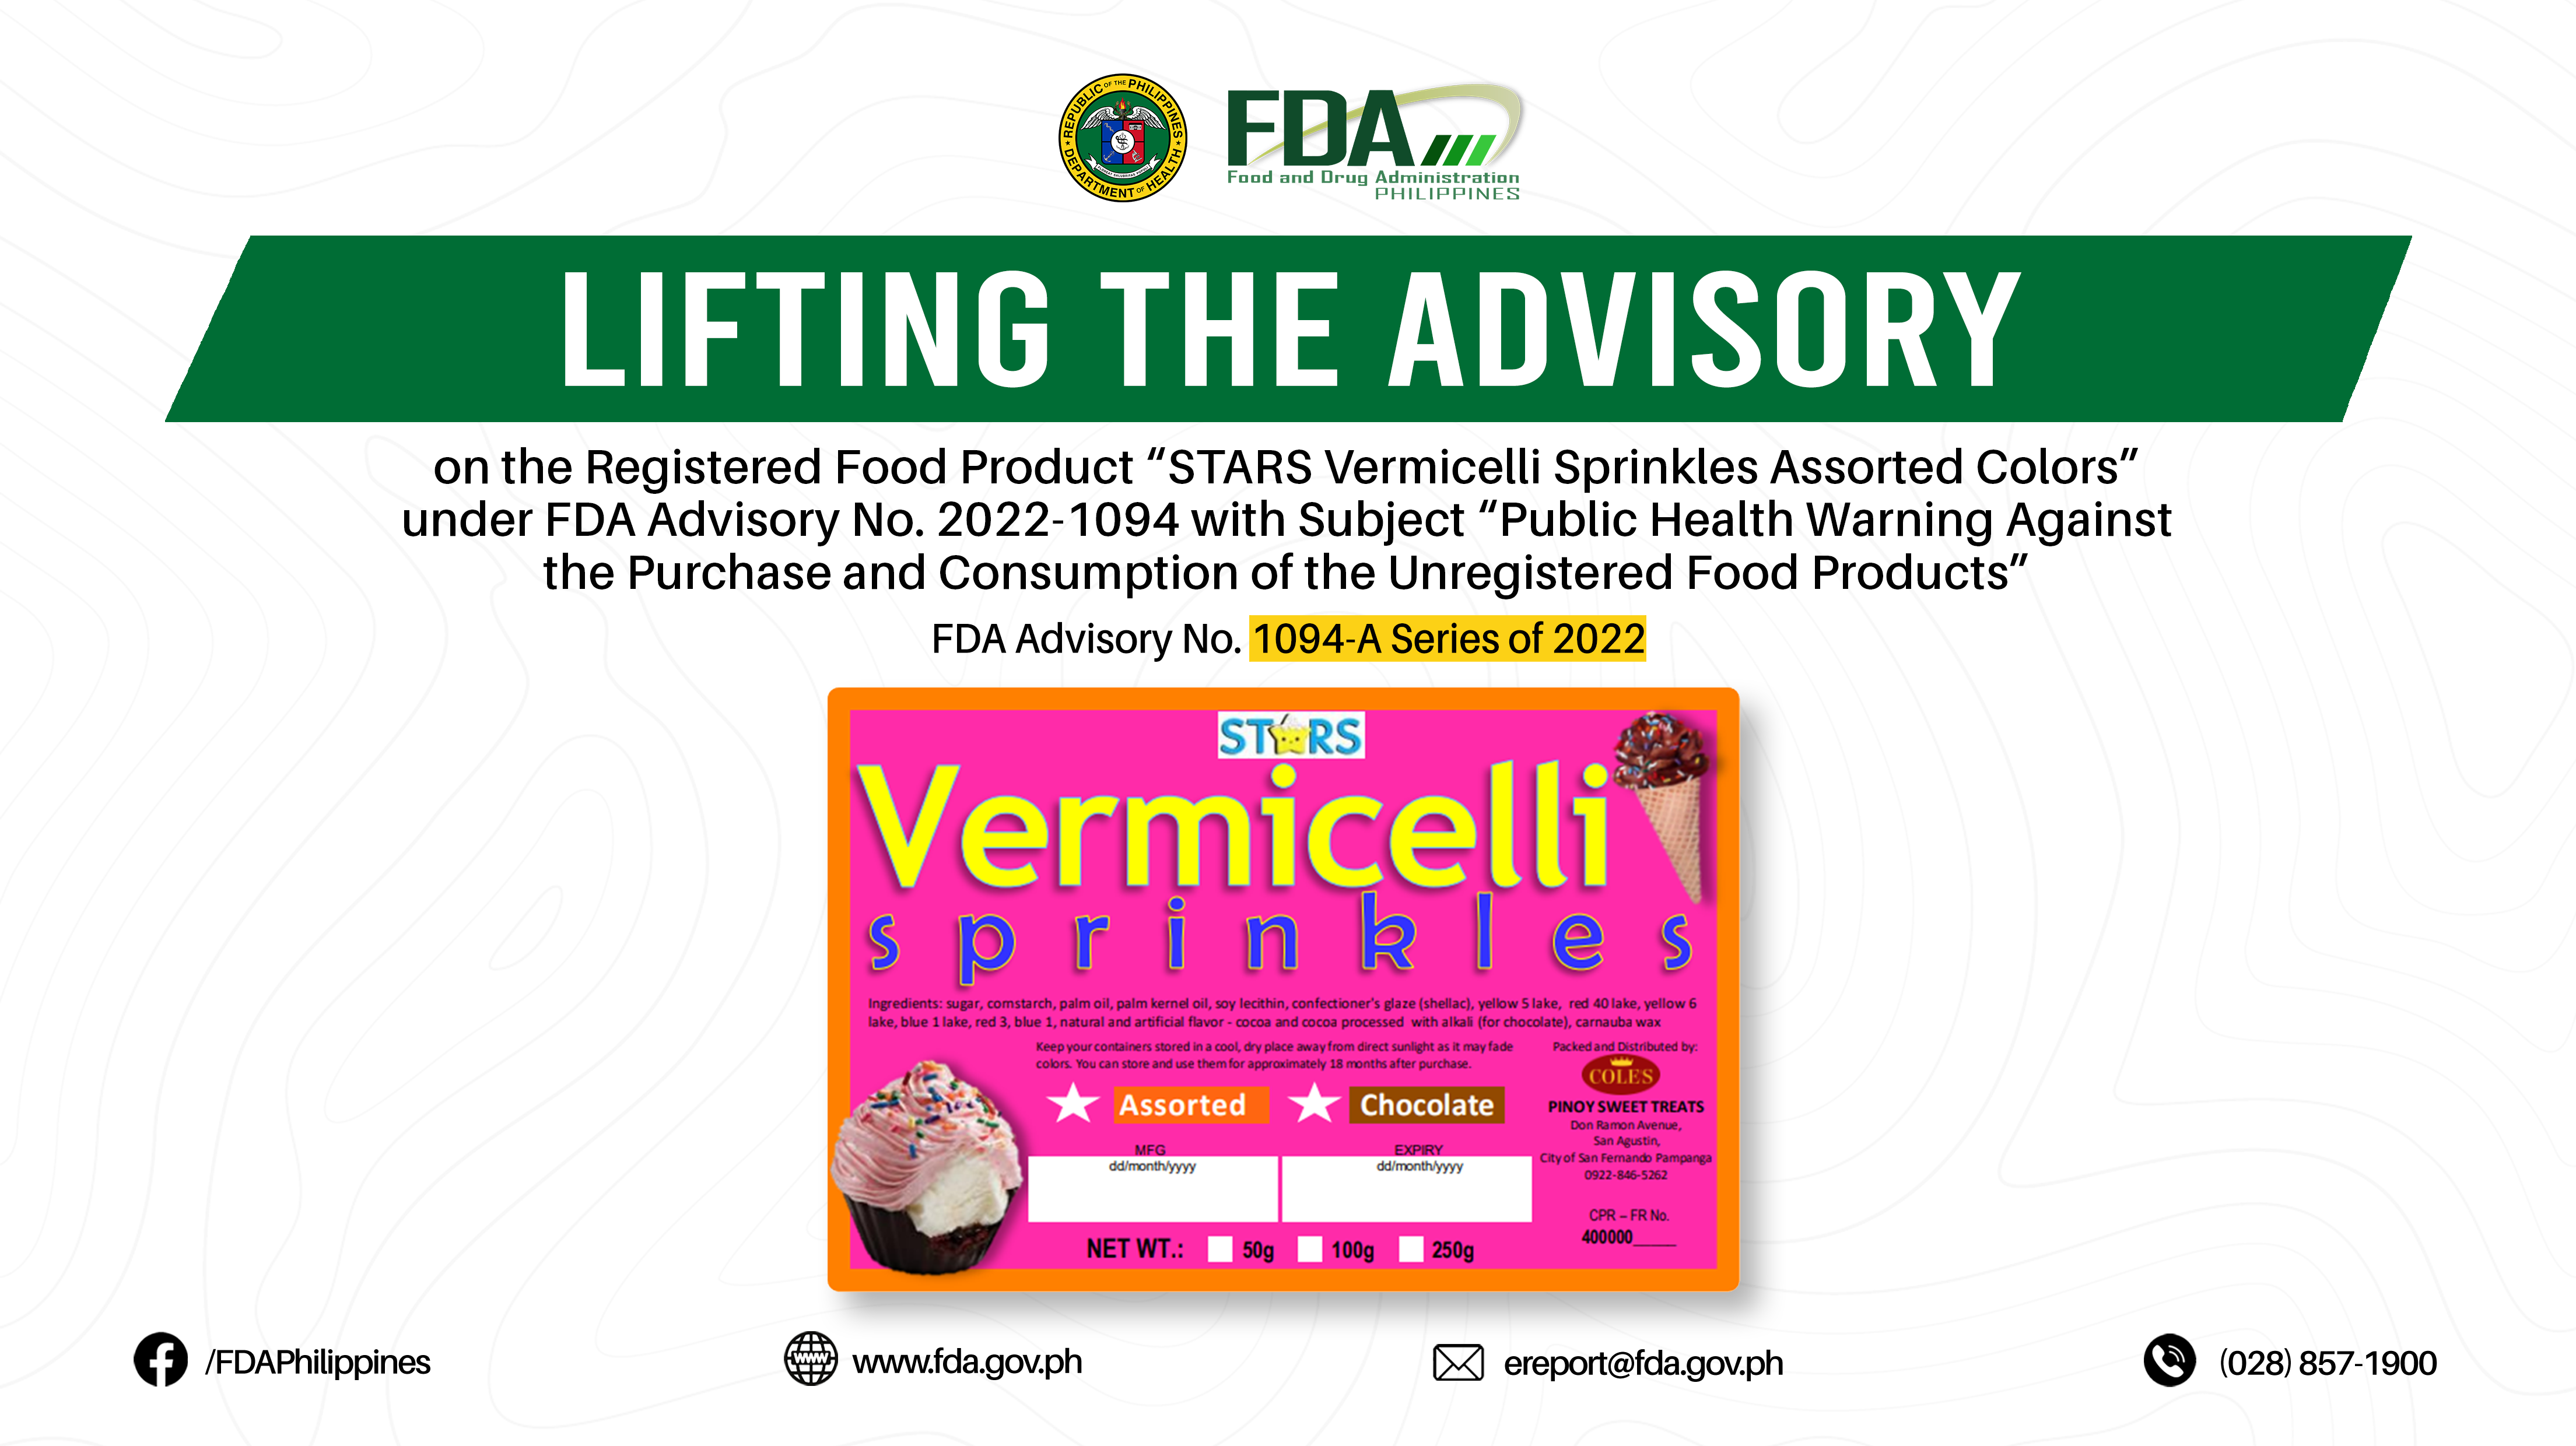 FDA Advisory No.2022-1094-A || Lifting the Advisory on the Registered Food Product “STARS Vermicelli Sprinkles Assorted Colors” under FDA Advisory No. 2022-1094 with Subject “Public Health Warning Against the Purchase and Consumption of the Unregistered Food Products”